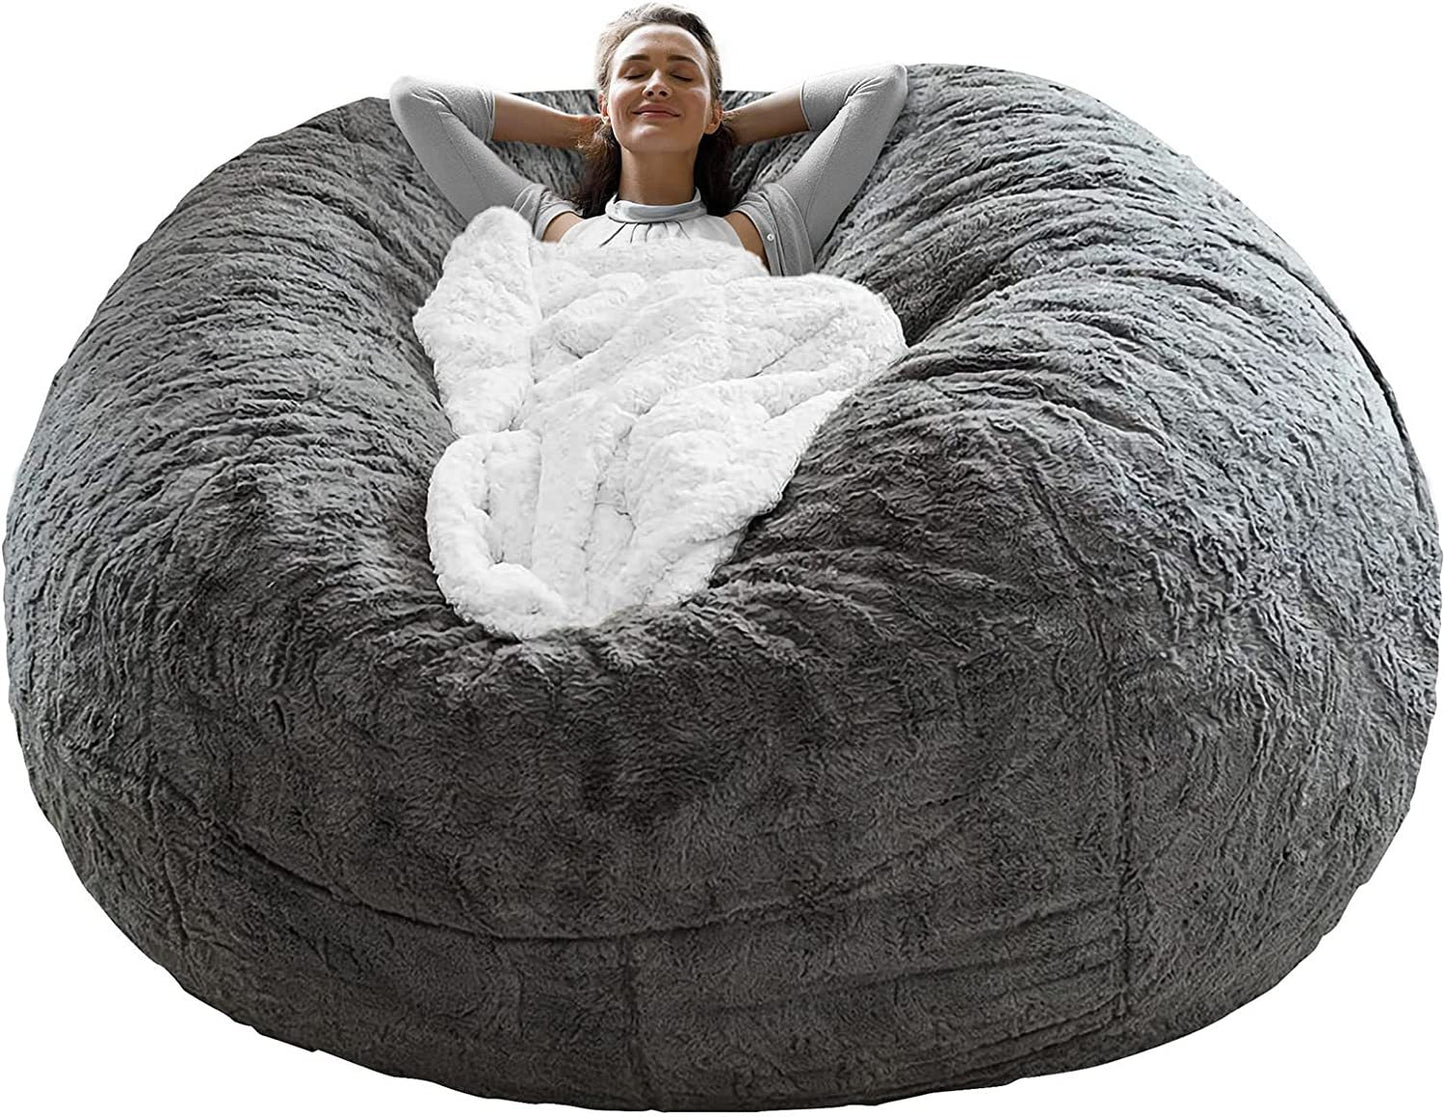 Bag Chair Coverit Was Only A Cover, Not A Full Bean BagChair Cushion, Big Round Soft Fluffy PV Velvet Sofa Bed Cover,  Living Room Furniture,  Lazy Sofa Bed Cover,6ft Dark Grey